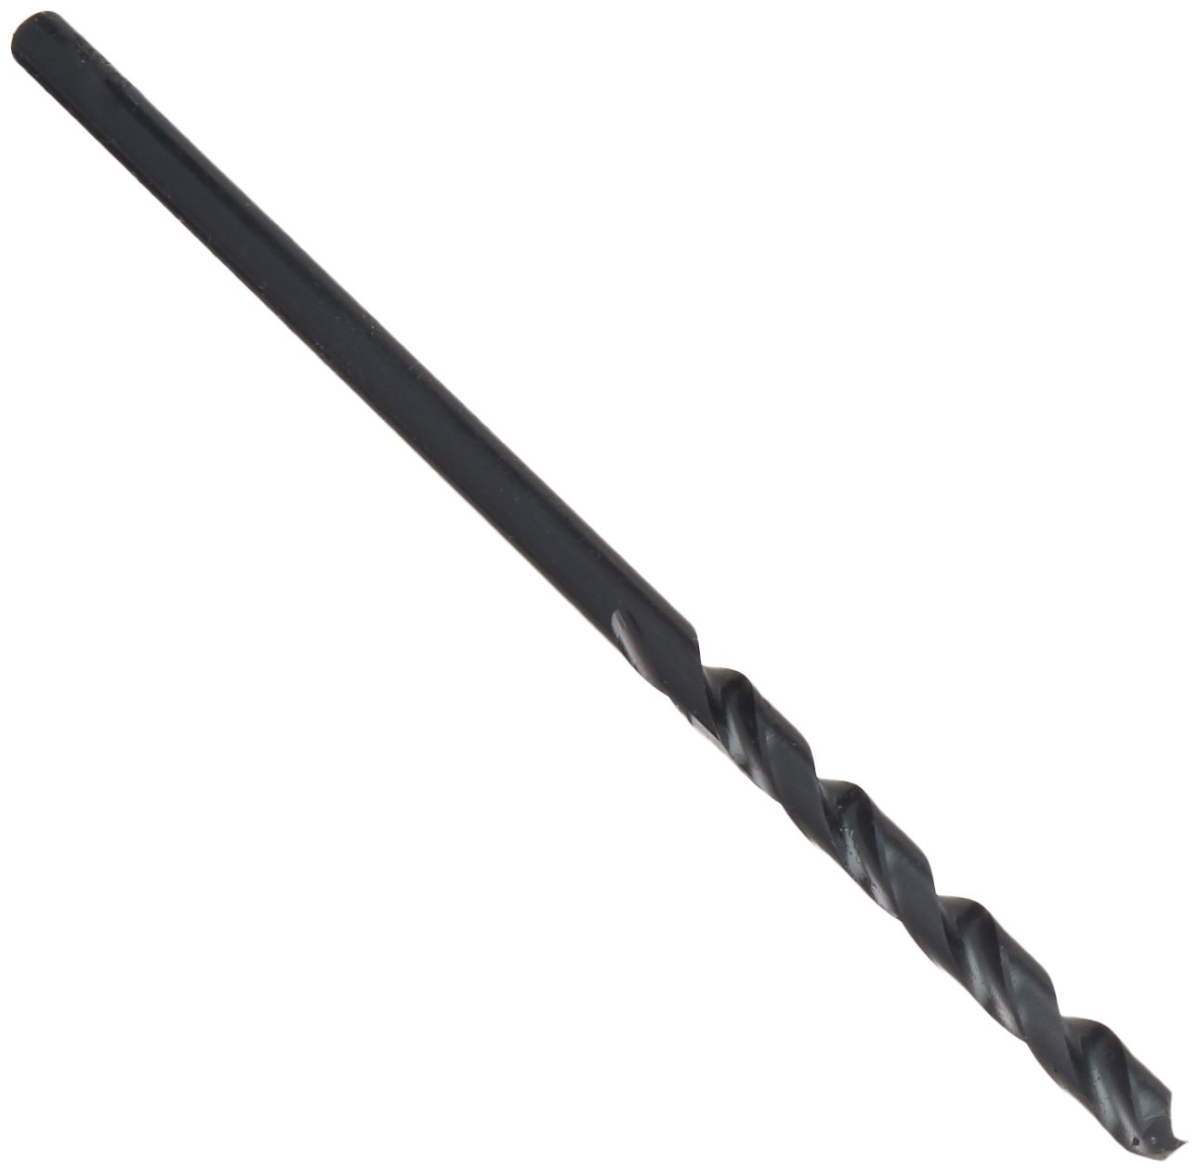 Irwin Hanson Ahn-66714 6 In. Single Black Oxide High-speed Steel Drill Bit With Aircraft Extension